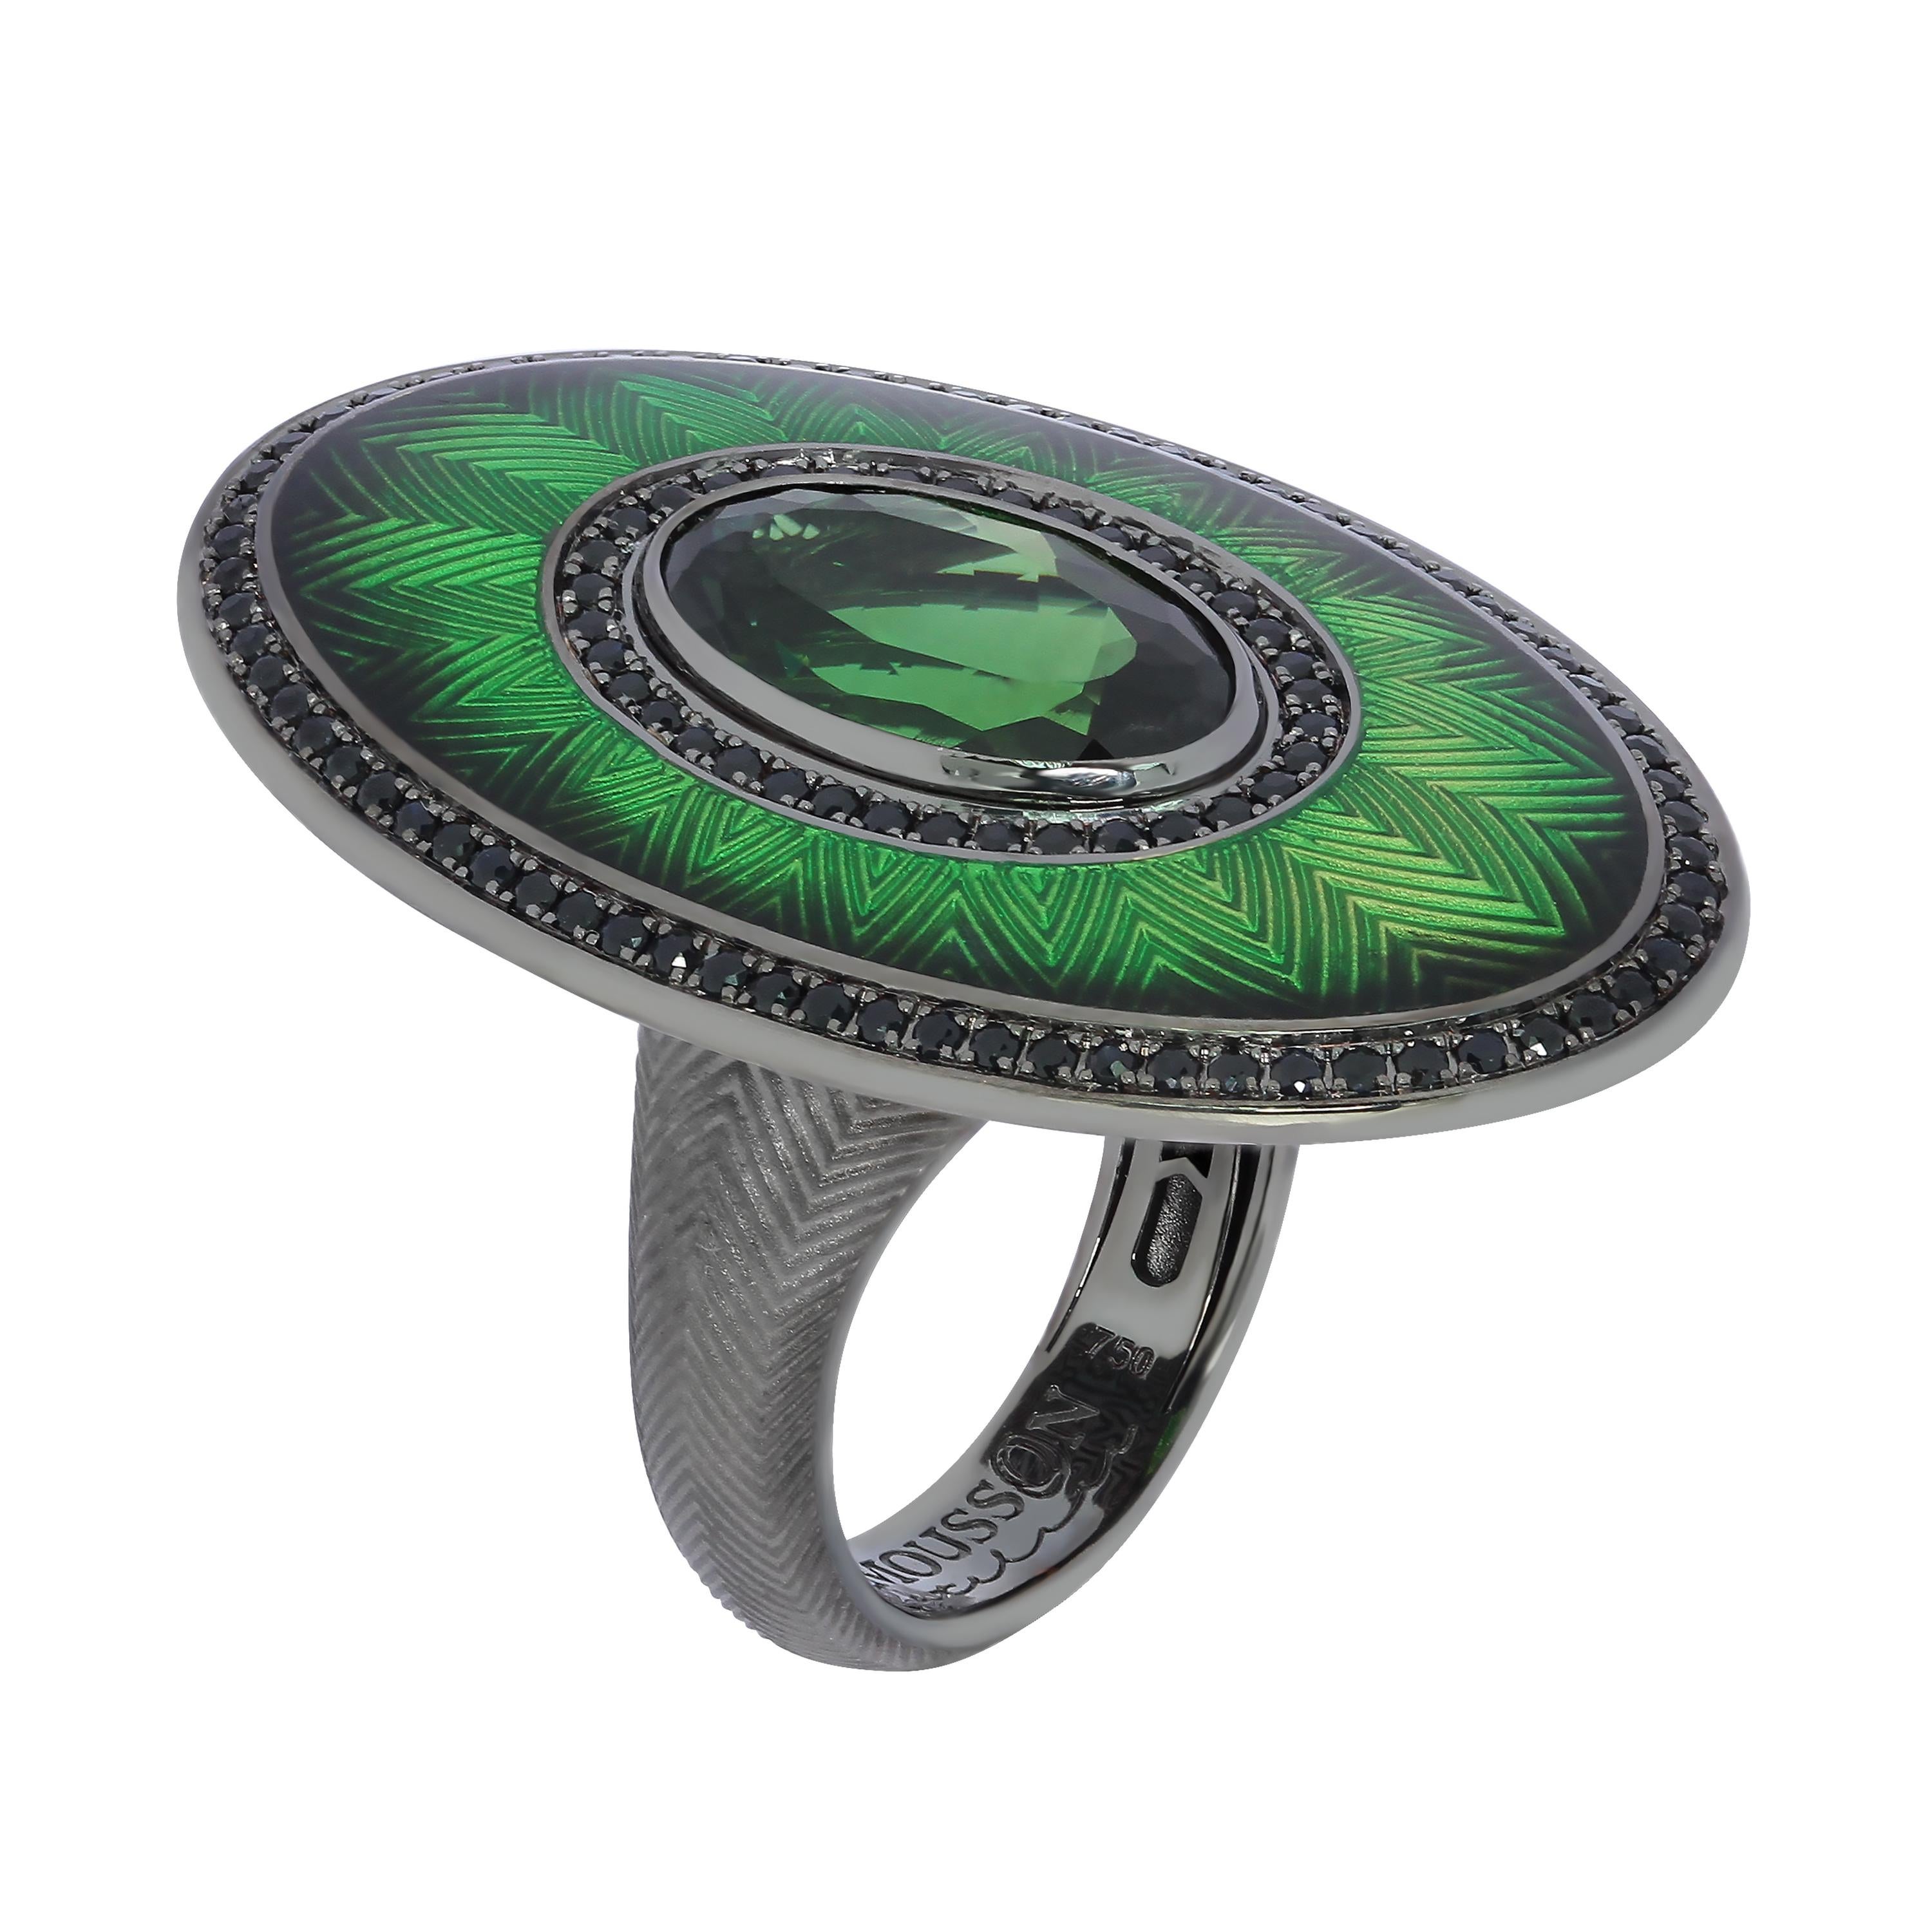 Green Tourmaline 5.15 Carat Black Sapphire 18 Karat Black Gold Enamel Ring
We present you a Ring from our signature collection 